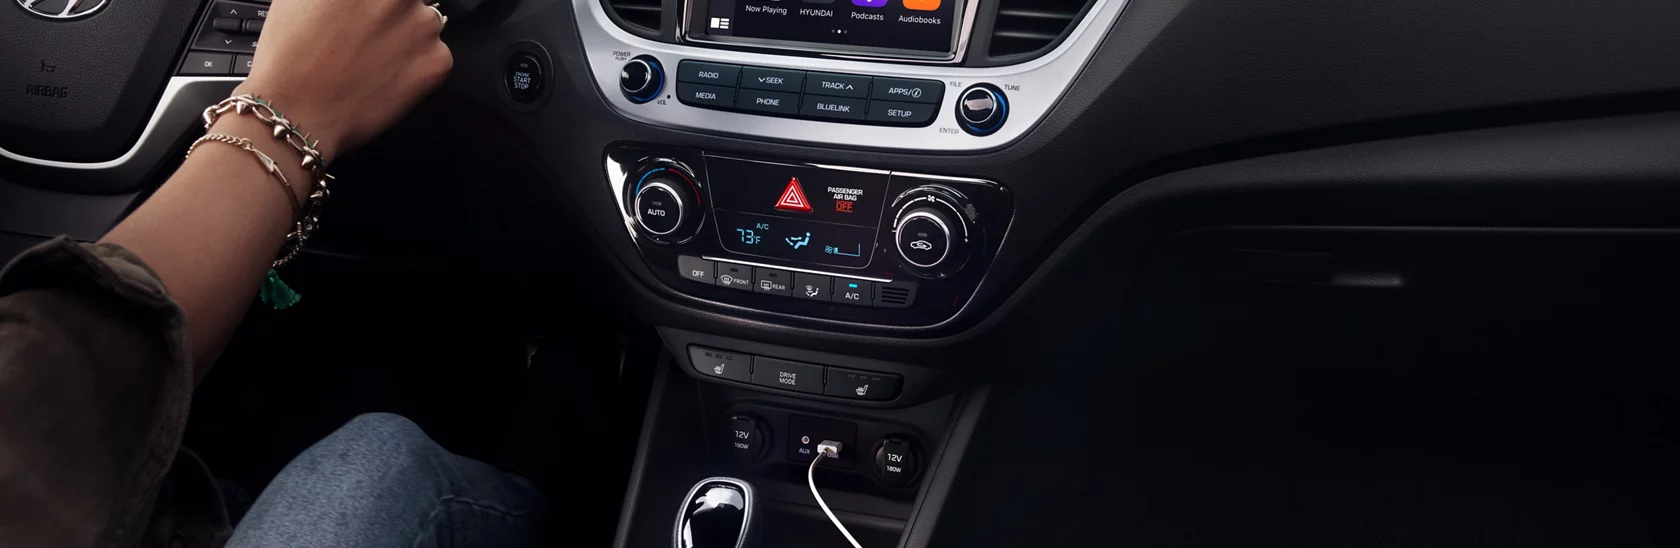 2022 Hyundai Accent Apple CarPlay and Android Auto